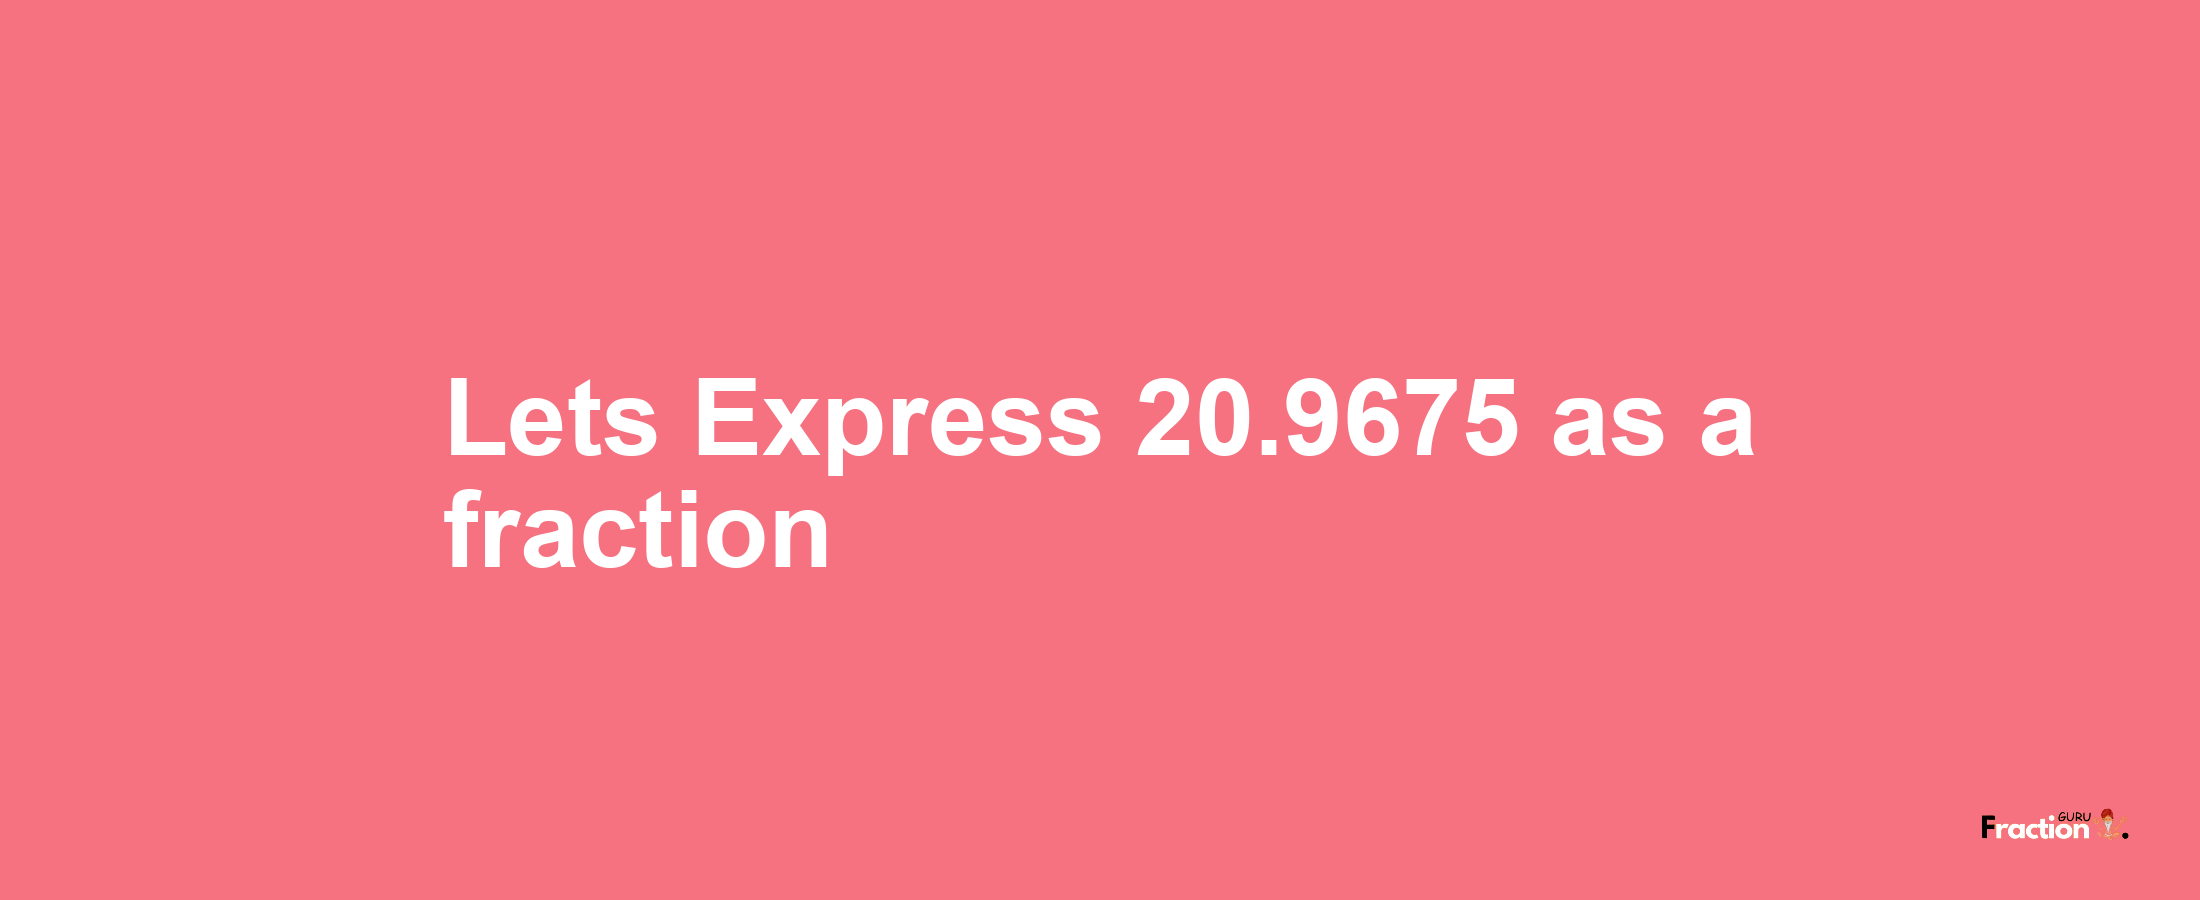 Lets Express 20.9675 as afraction